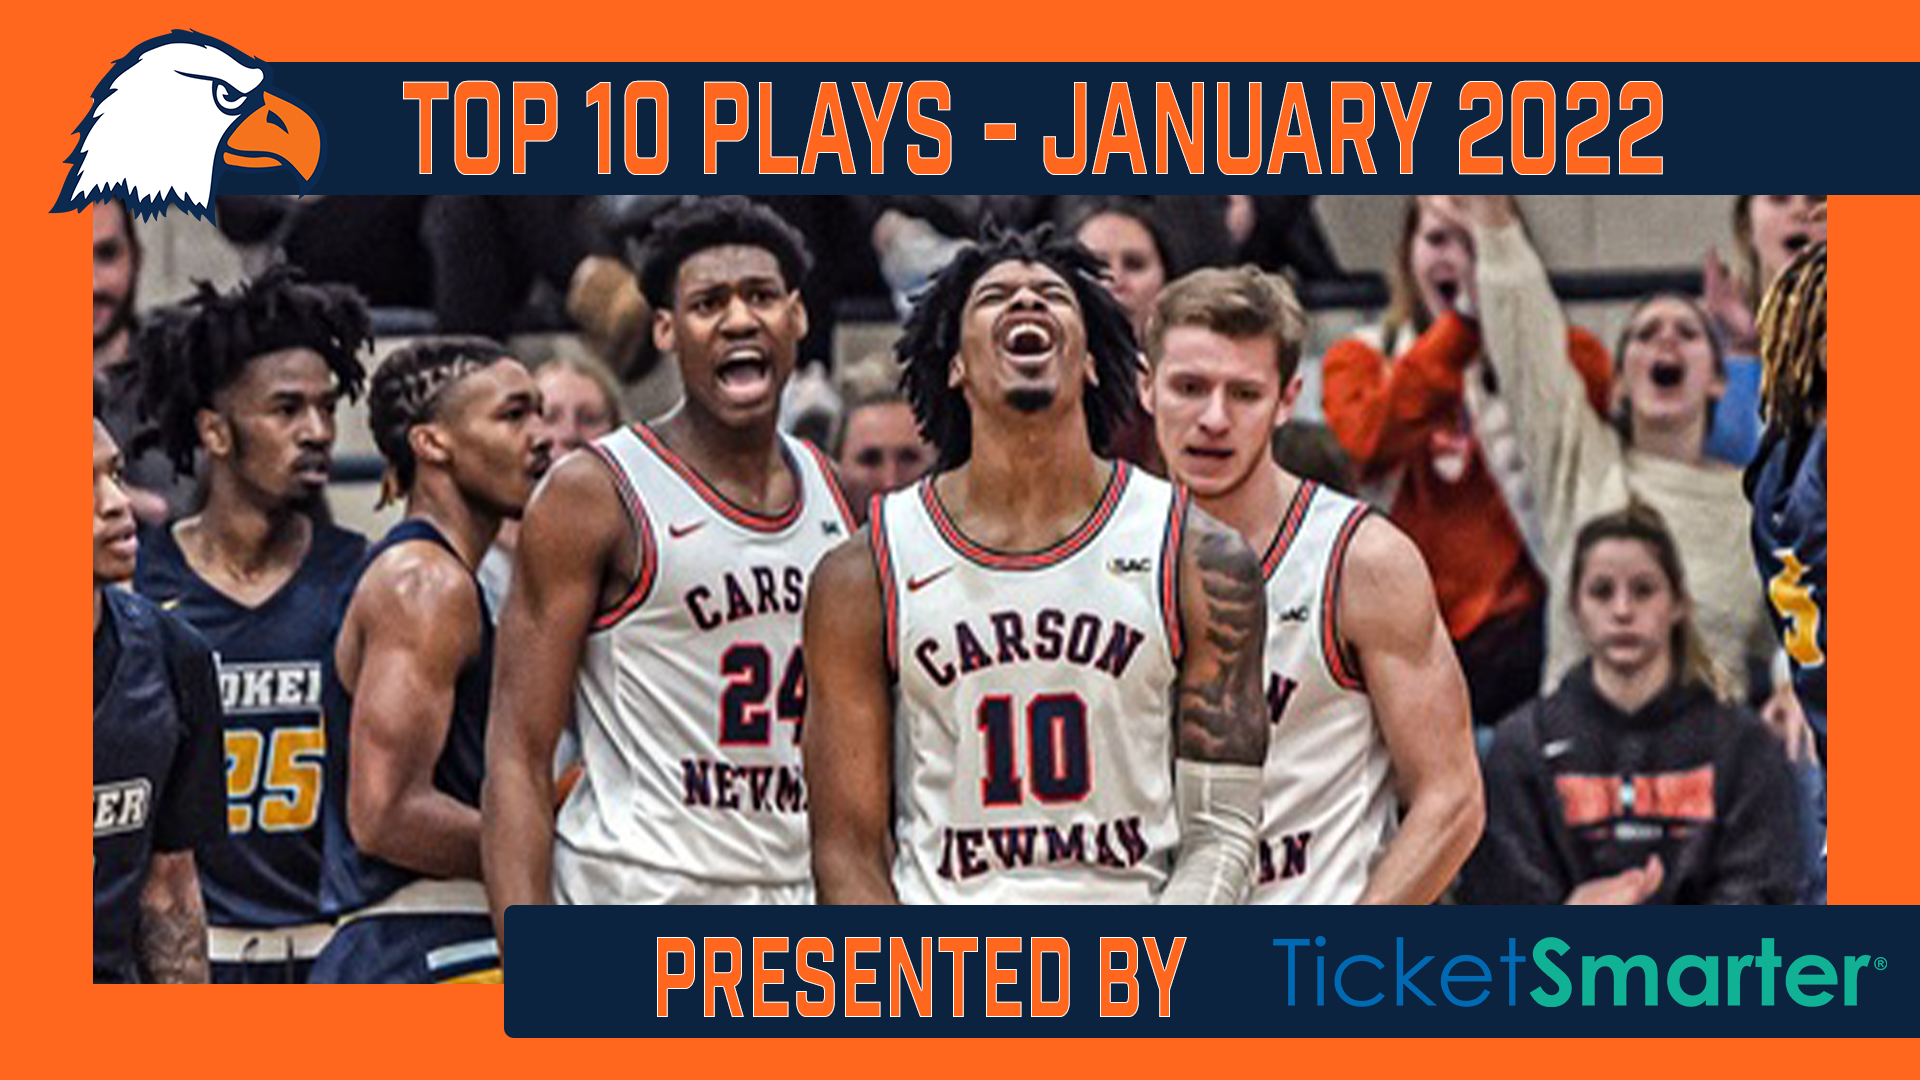 Eagle Sports Network releases top ten plays of January 2022 presented by TicketSmarter